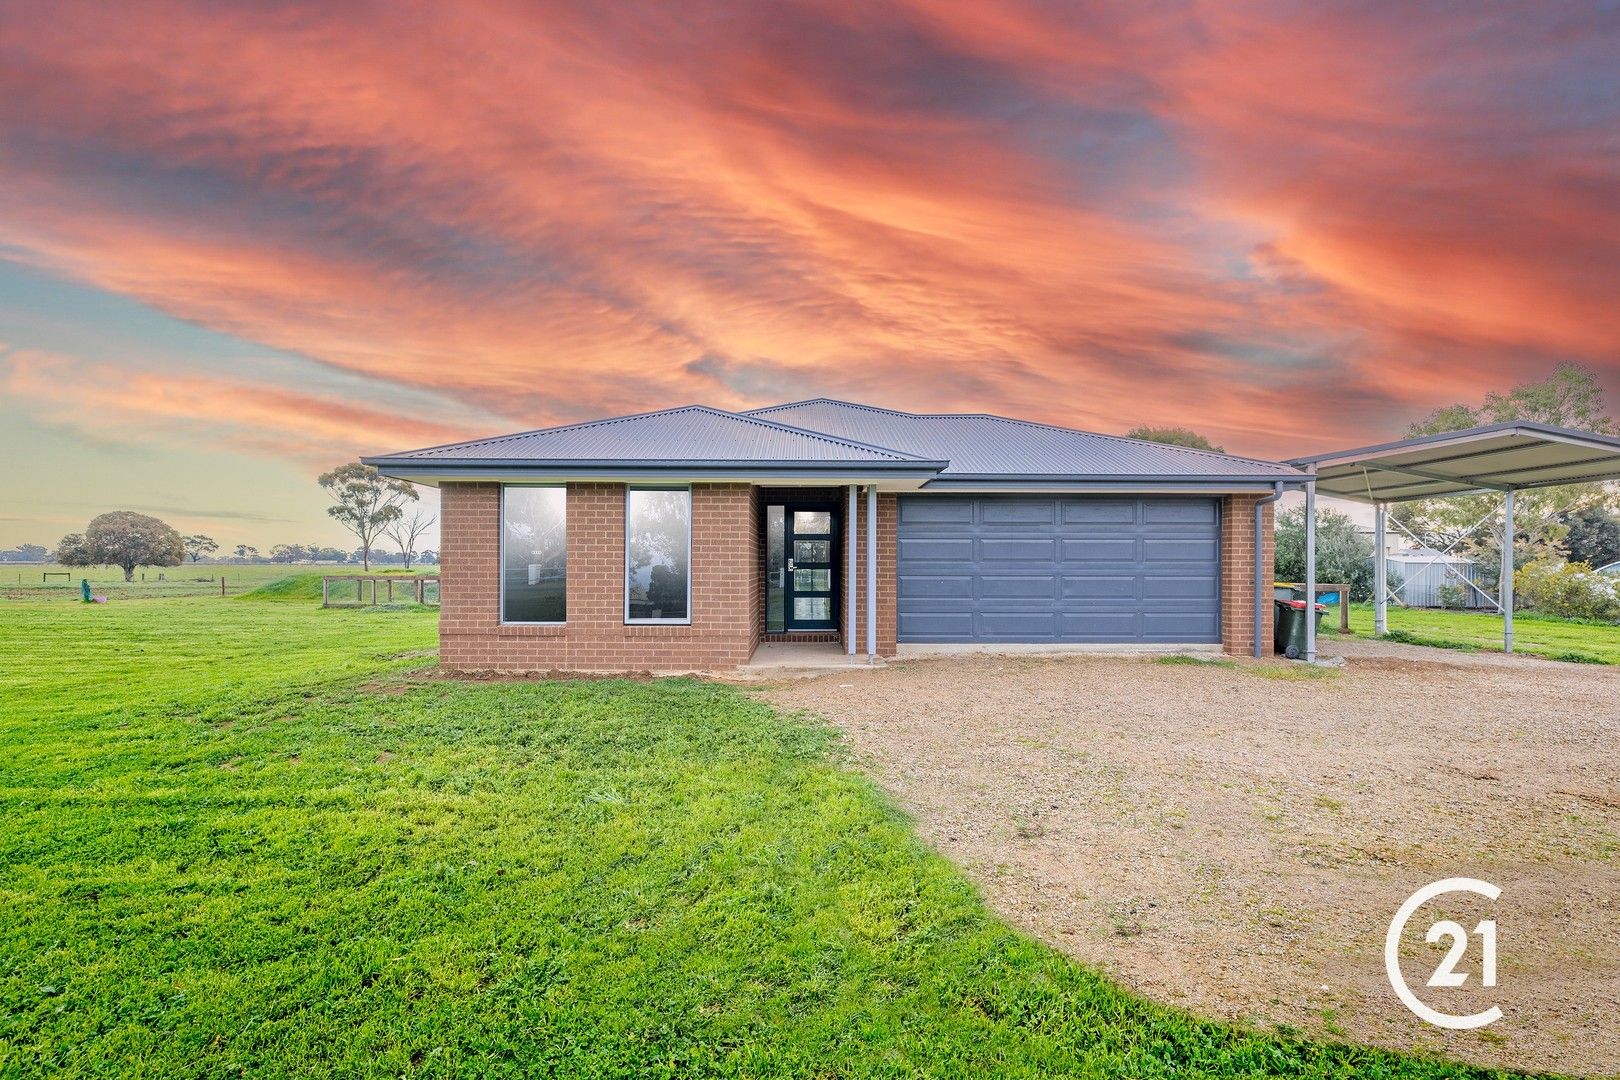 4 bedrooms House in 562 Lady Augusta Road ECHUCA VIC, 3564